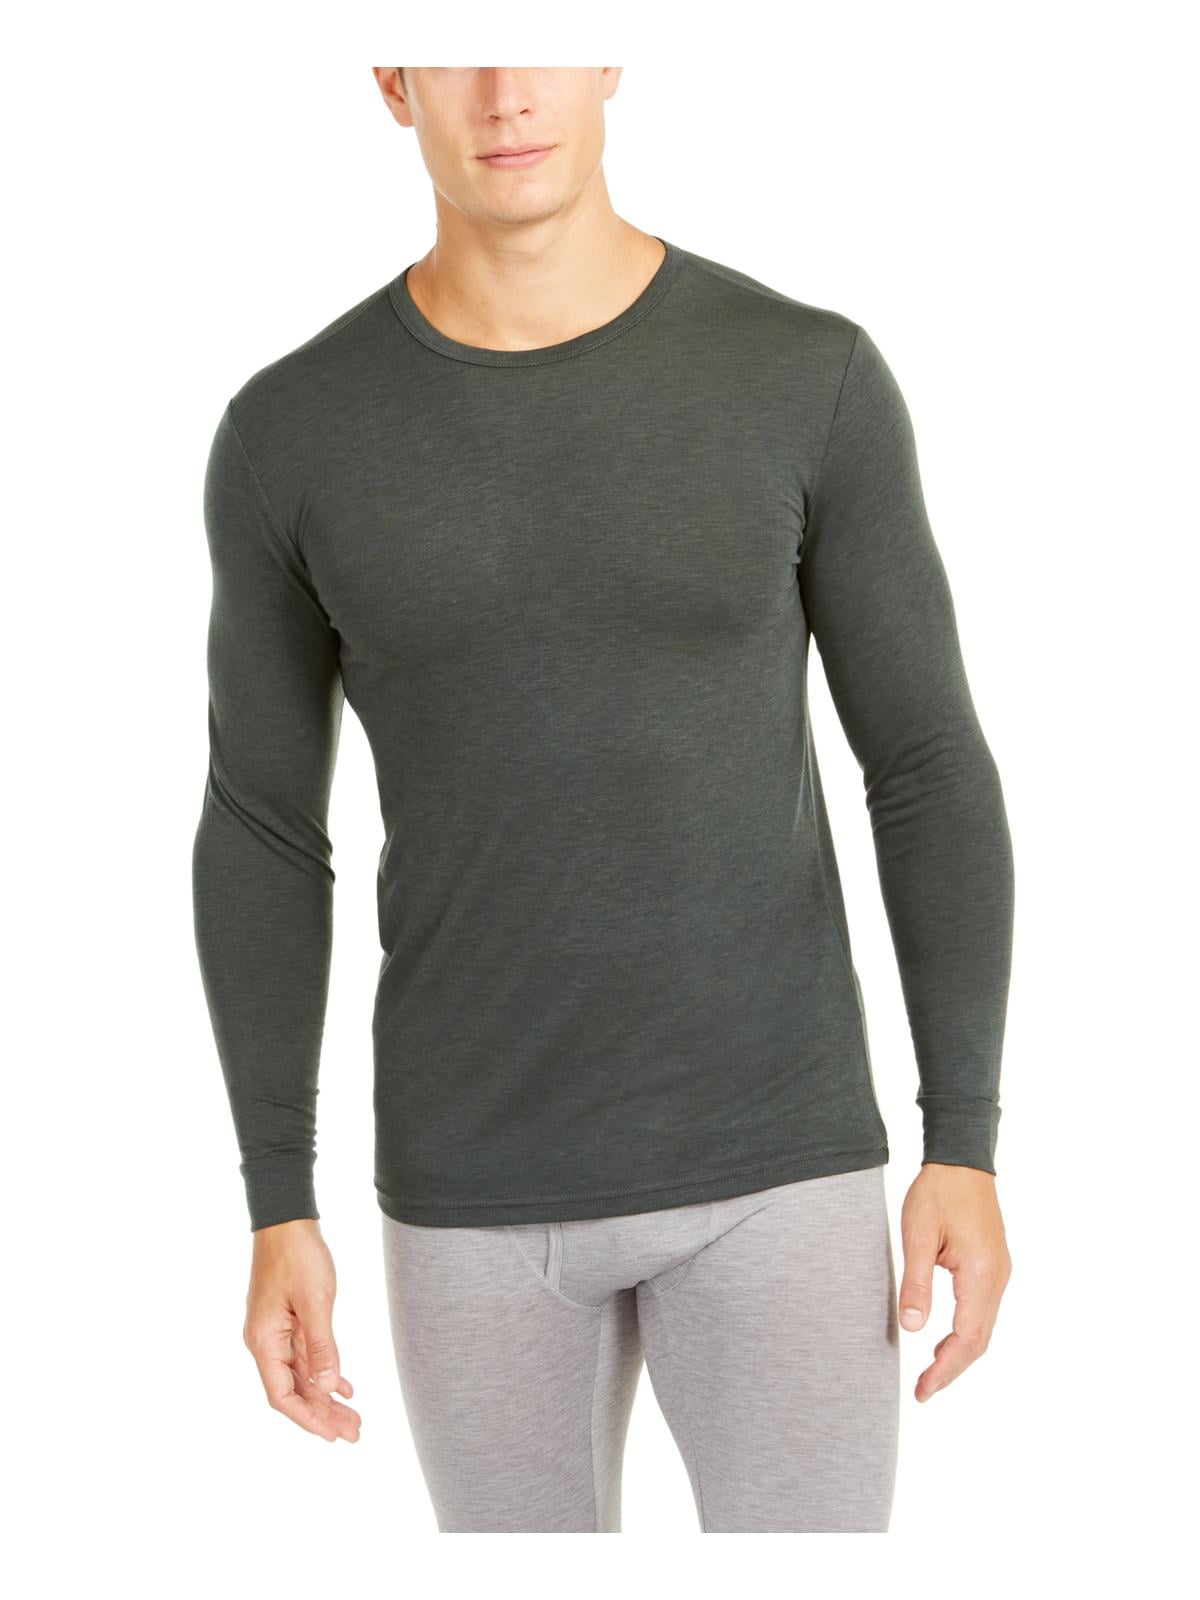 NWT Men's 32 Degrees Heat Long Sleeve Base Layer Crew Neck Top-Variety Available 